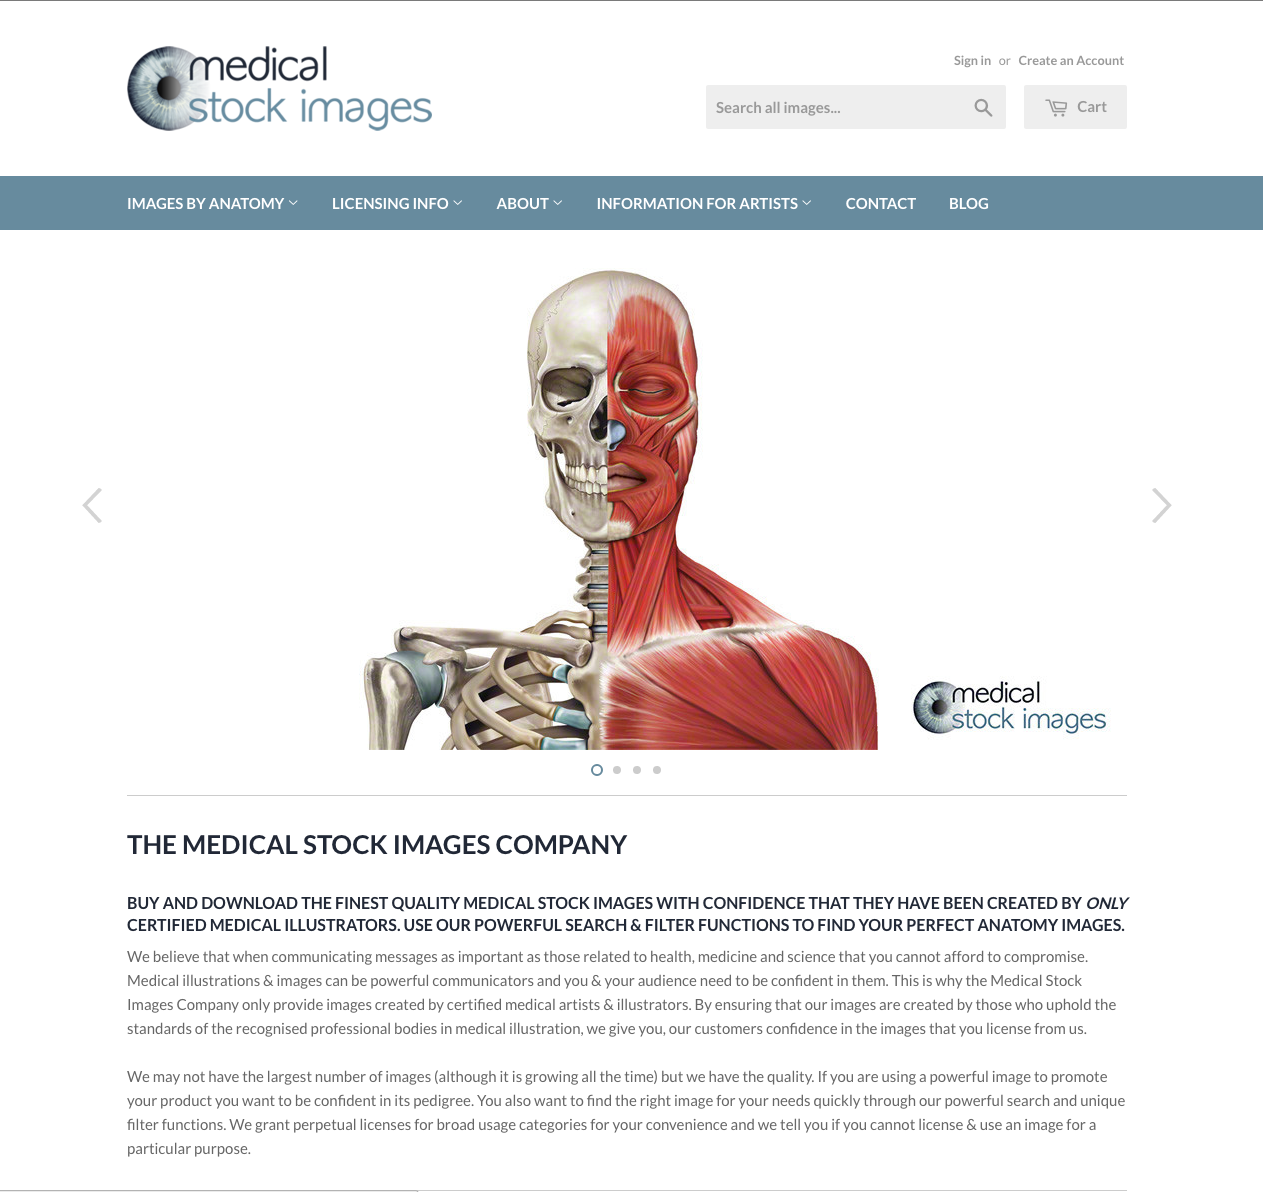 Medical Stock Images Company Website